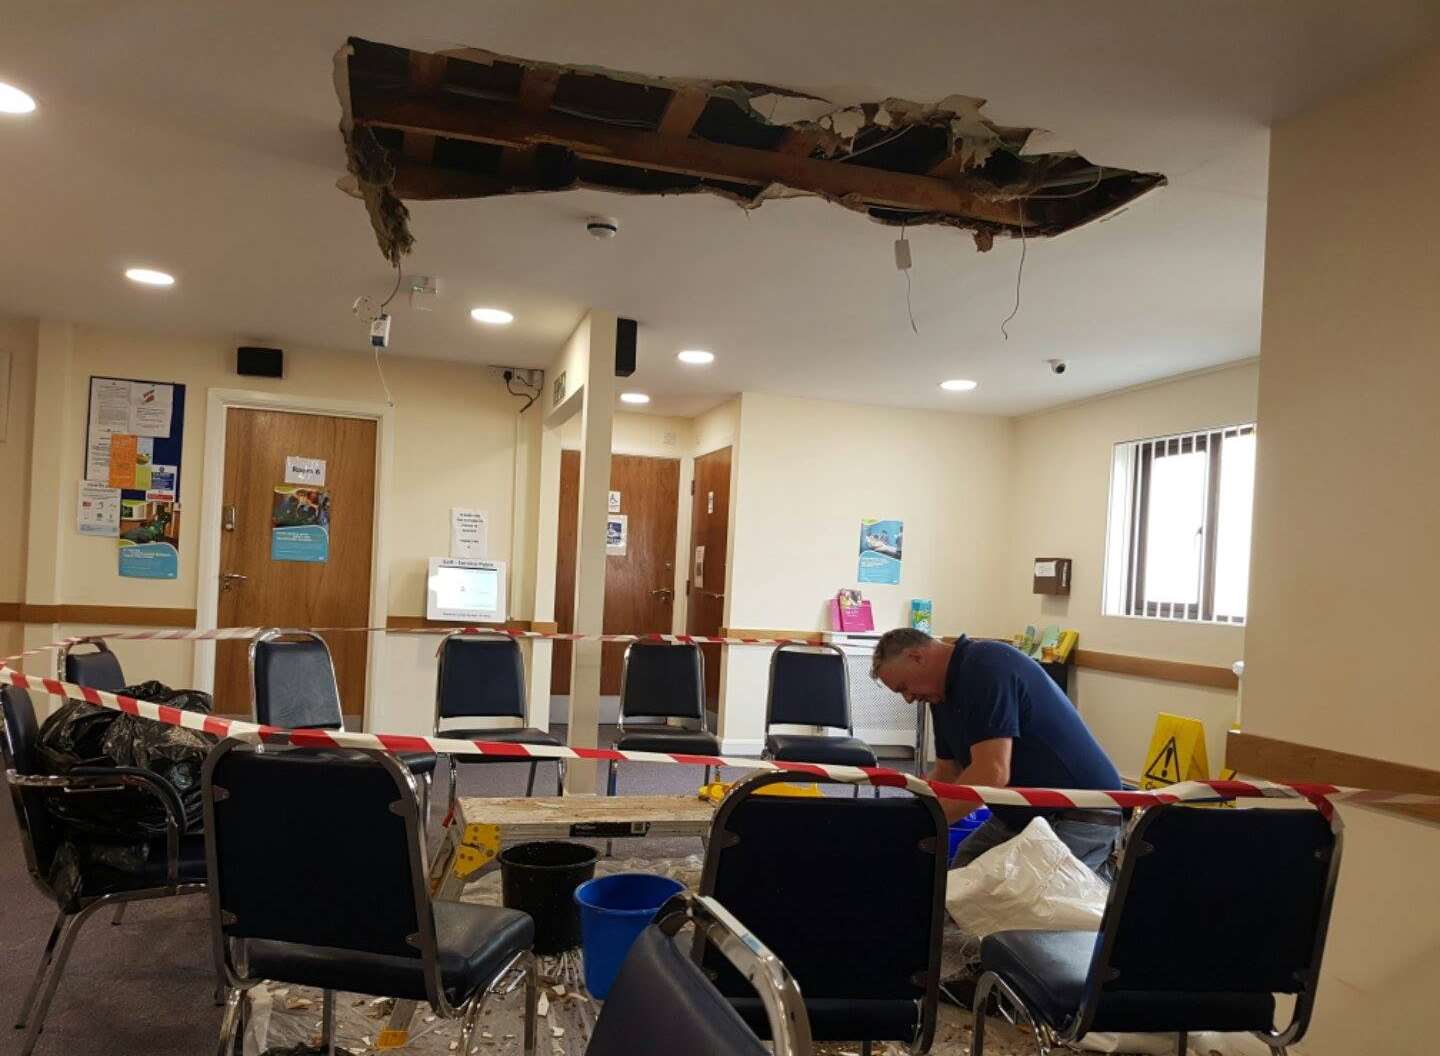 A witness reported seeing dust and water pouring from the ceiling of The Shepway Medical Centre today